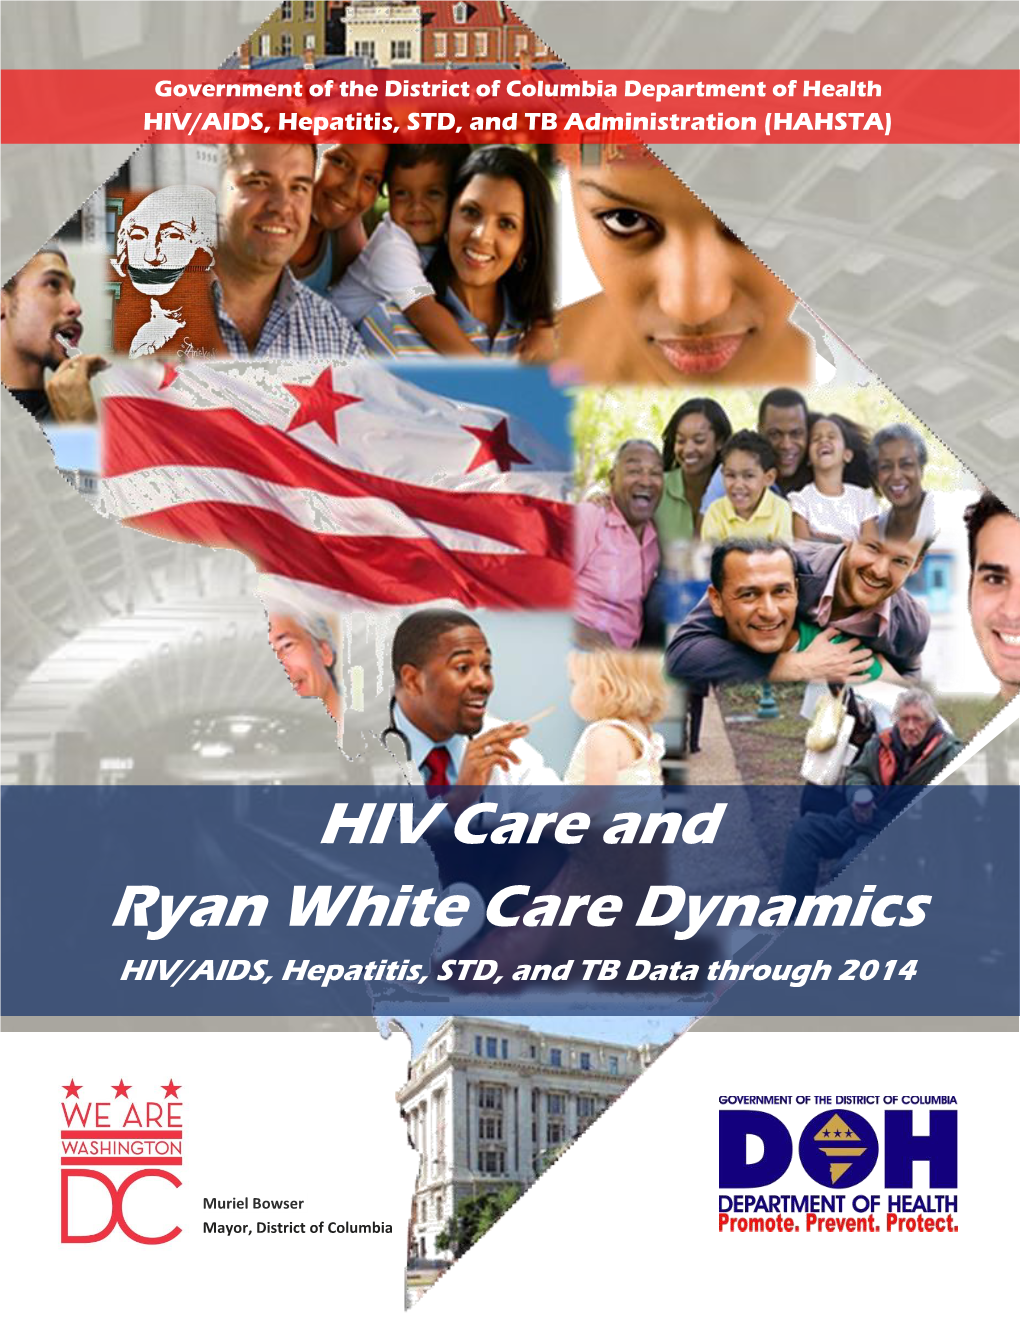 HIV Care and Ryan White Care Dynamics HIV/AIDS, Hepatitis, STD, and TB Data Through 2014